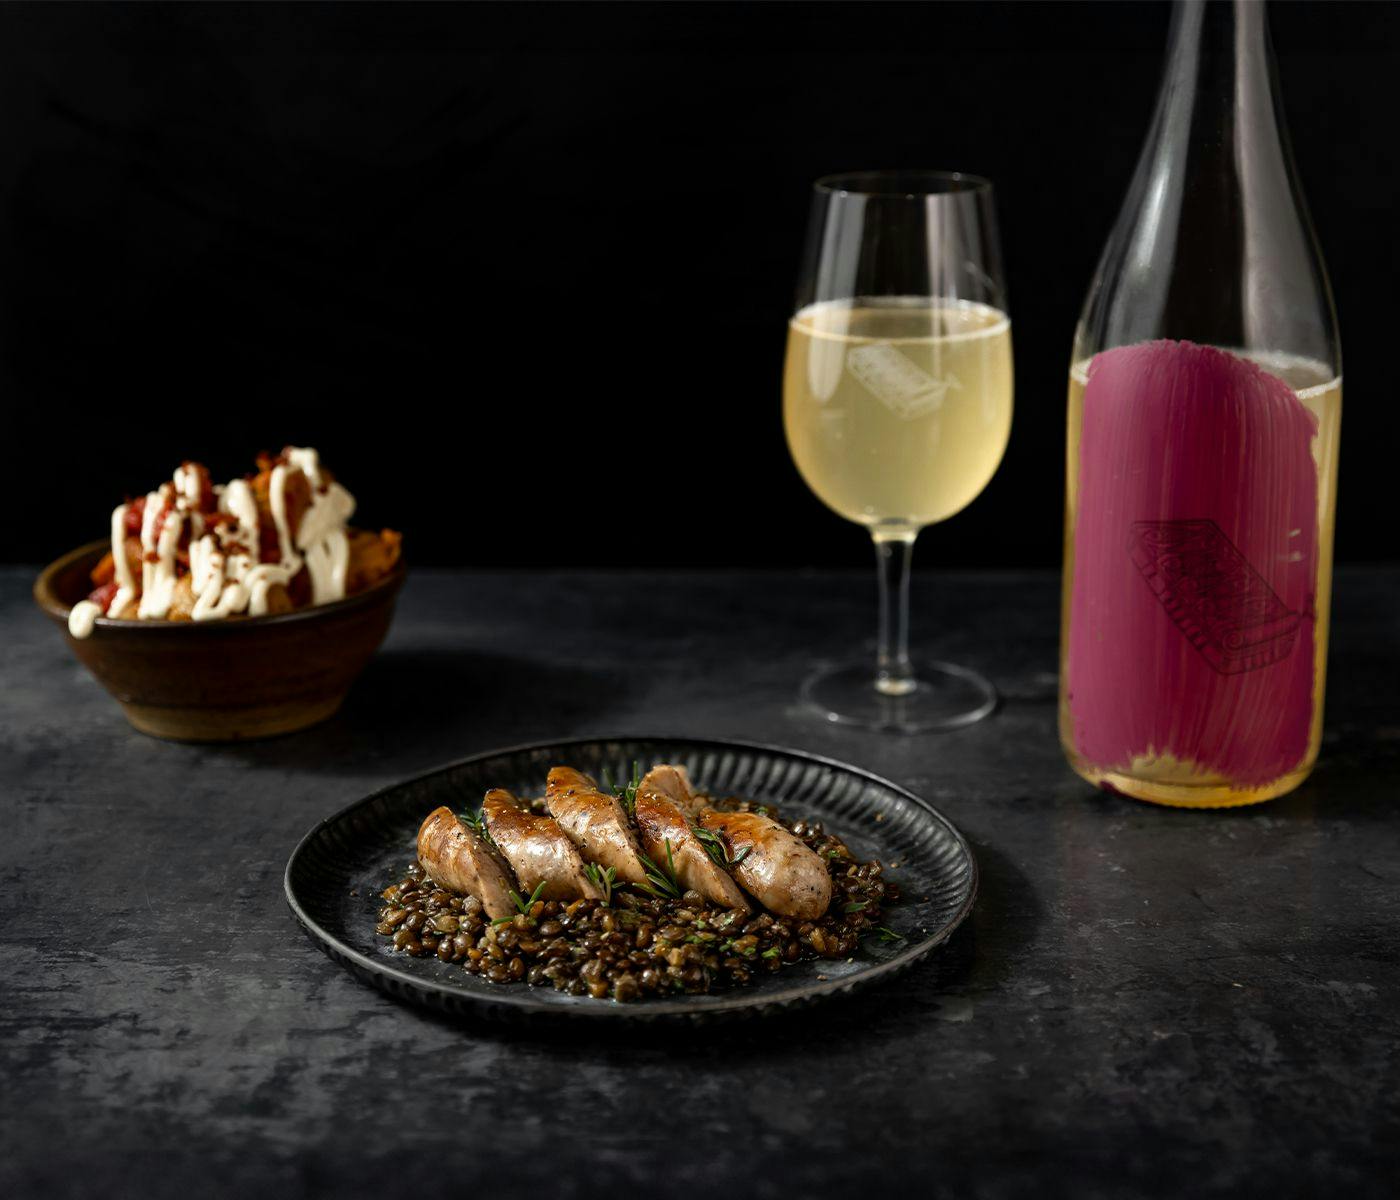 A plate of Spanish sausage and lentils, with a glass and bottle of white wine.